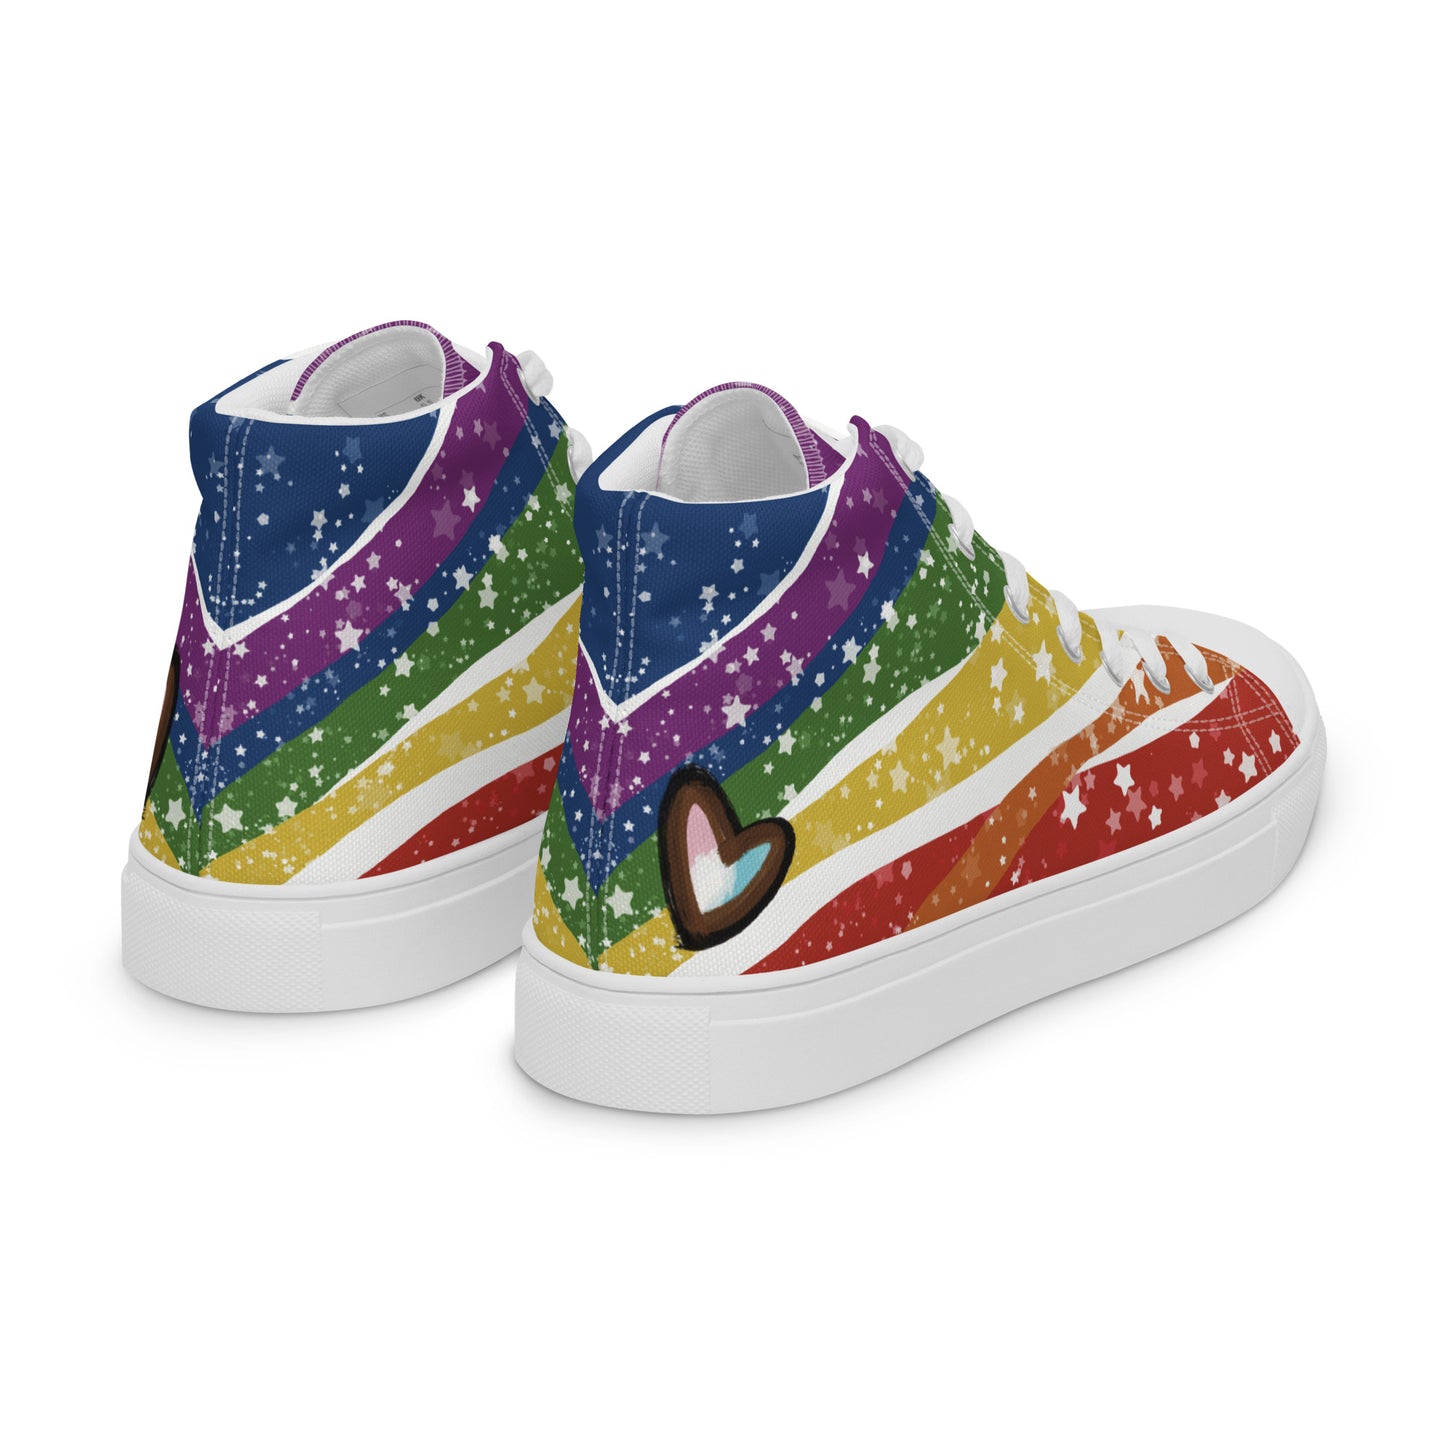 Right back view: A pair of high top shoes have wavy rainbow stripes coming from the heel and getting wider towards the laces, covered in stars, with a double heart in black and brown containing the Trans Pride flag near the heel.